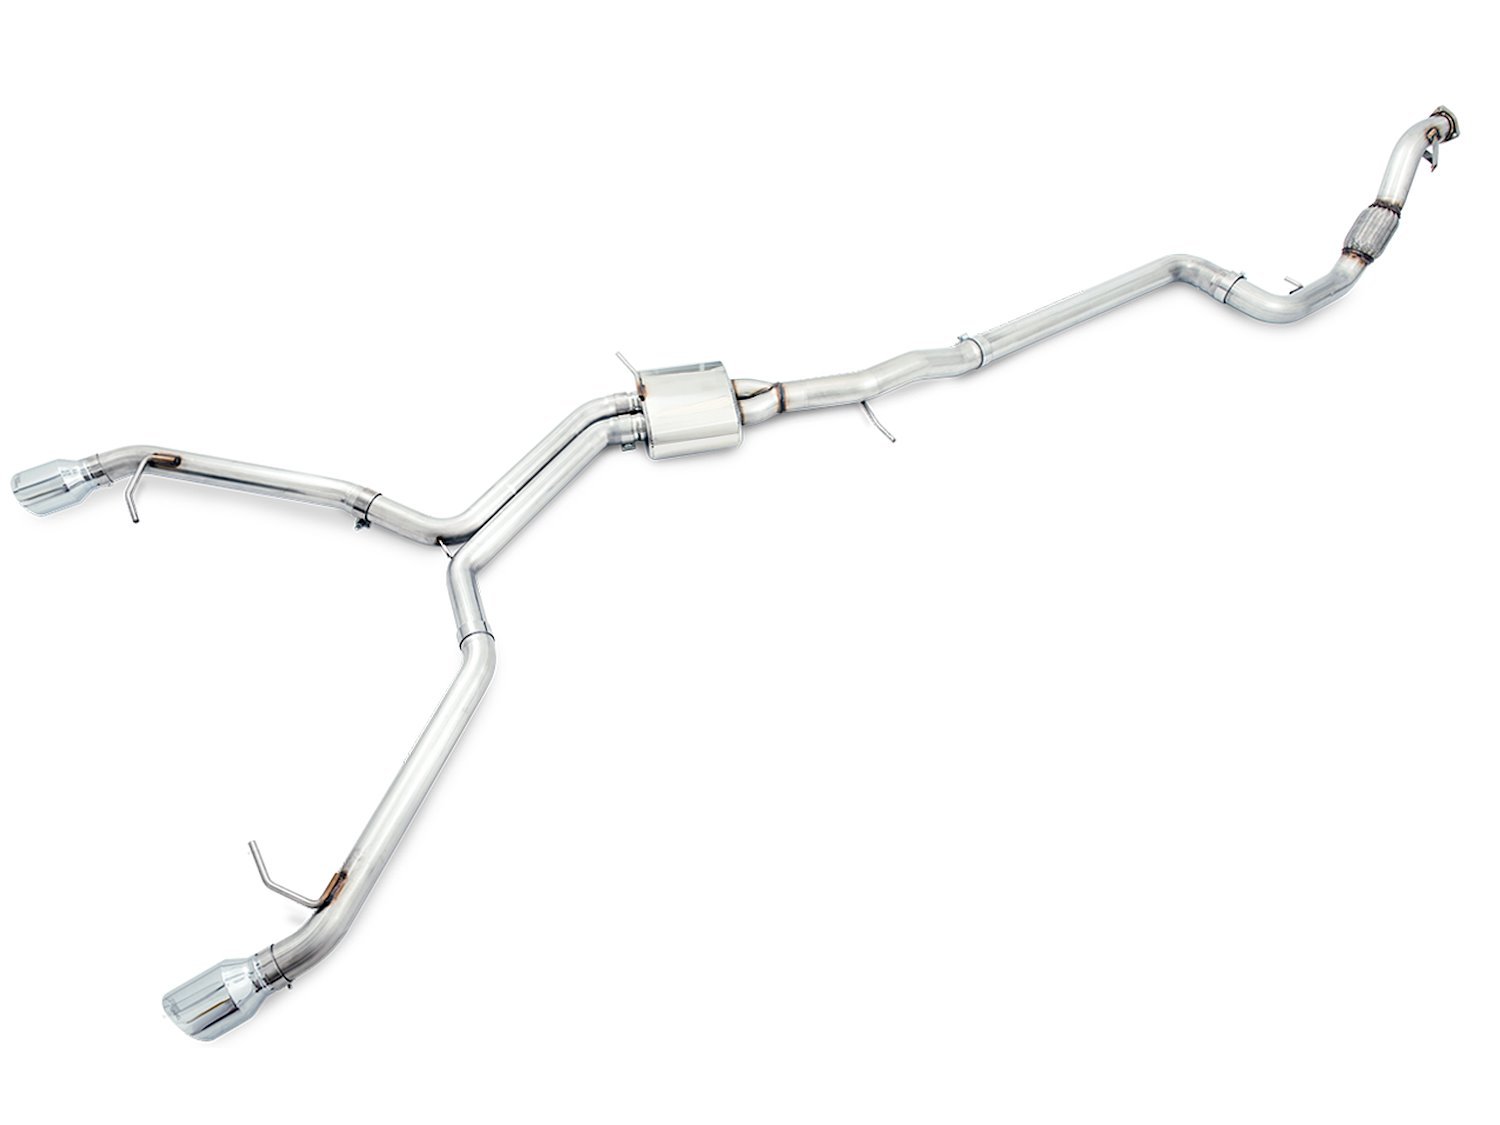 AWE Touring Edition Exhaust for B9 A5, Dual Outlet - Chrome Silver Tips (includes DP)